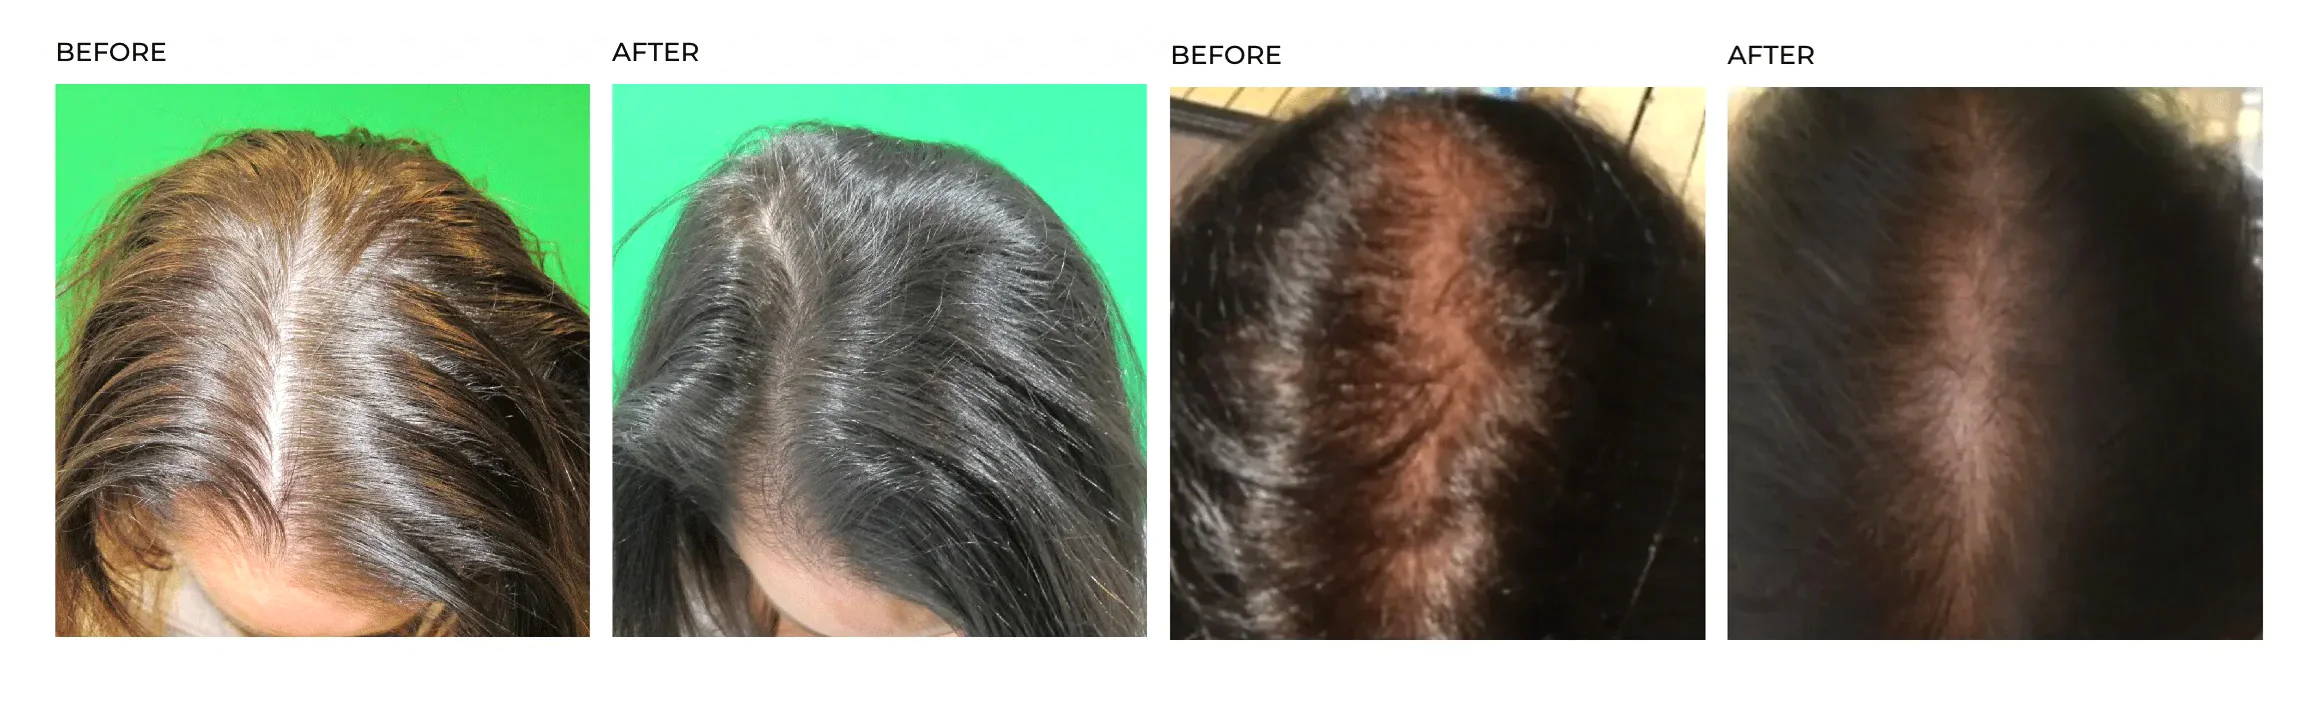 DeeplyRooted_Before_After_2